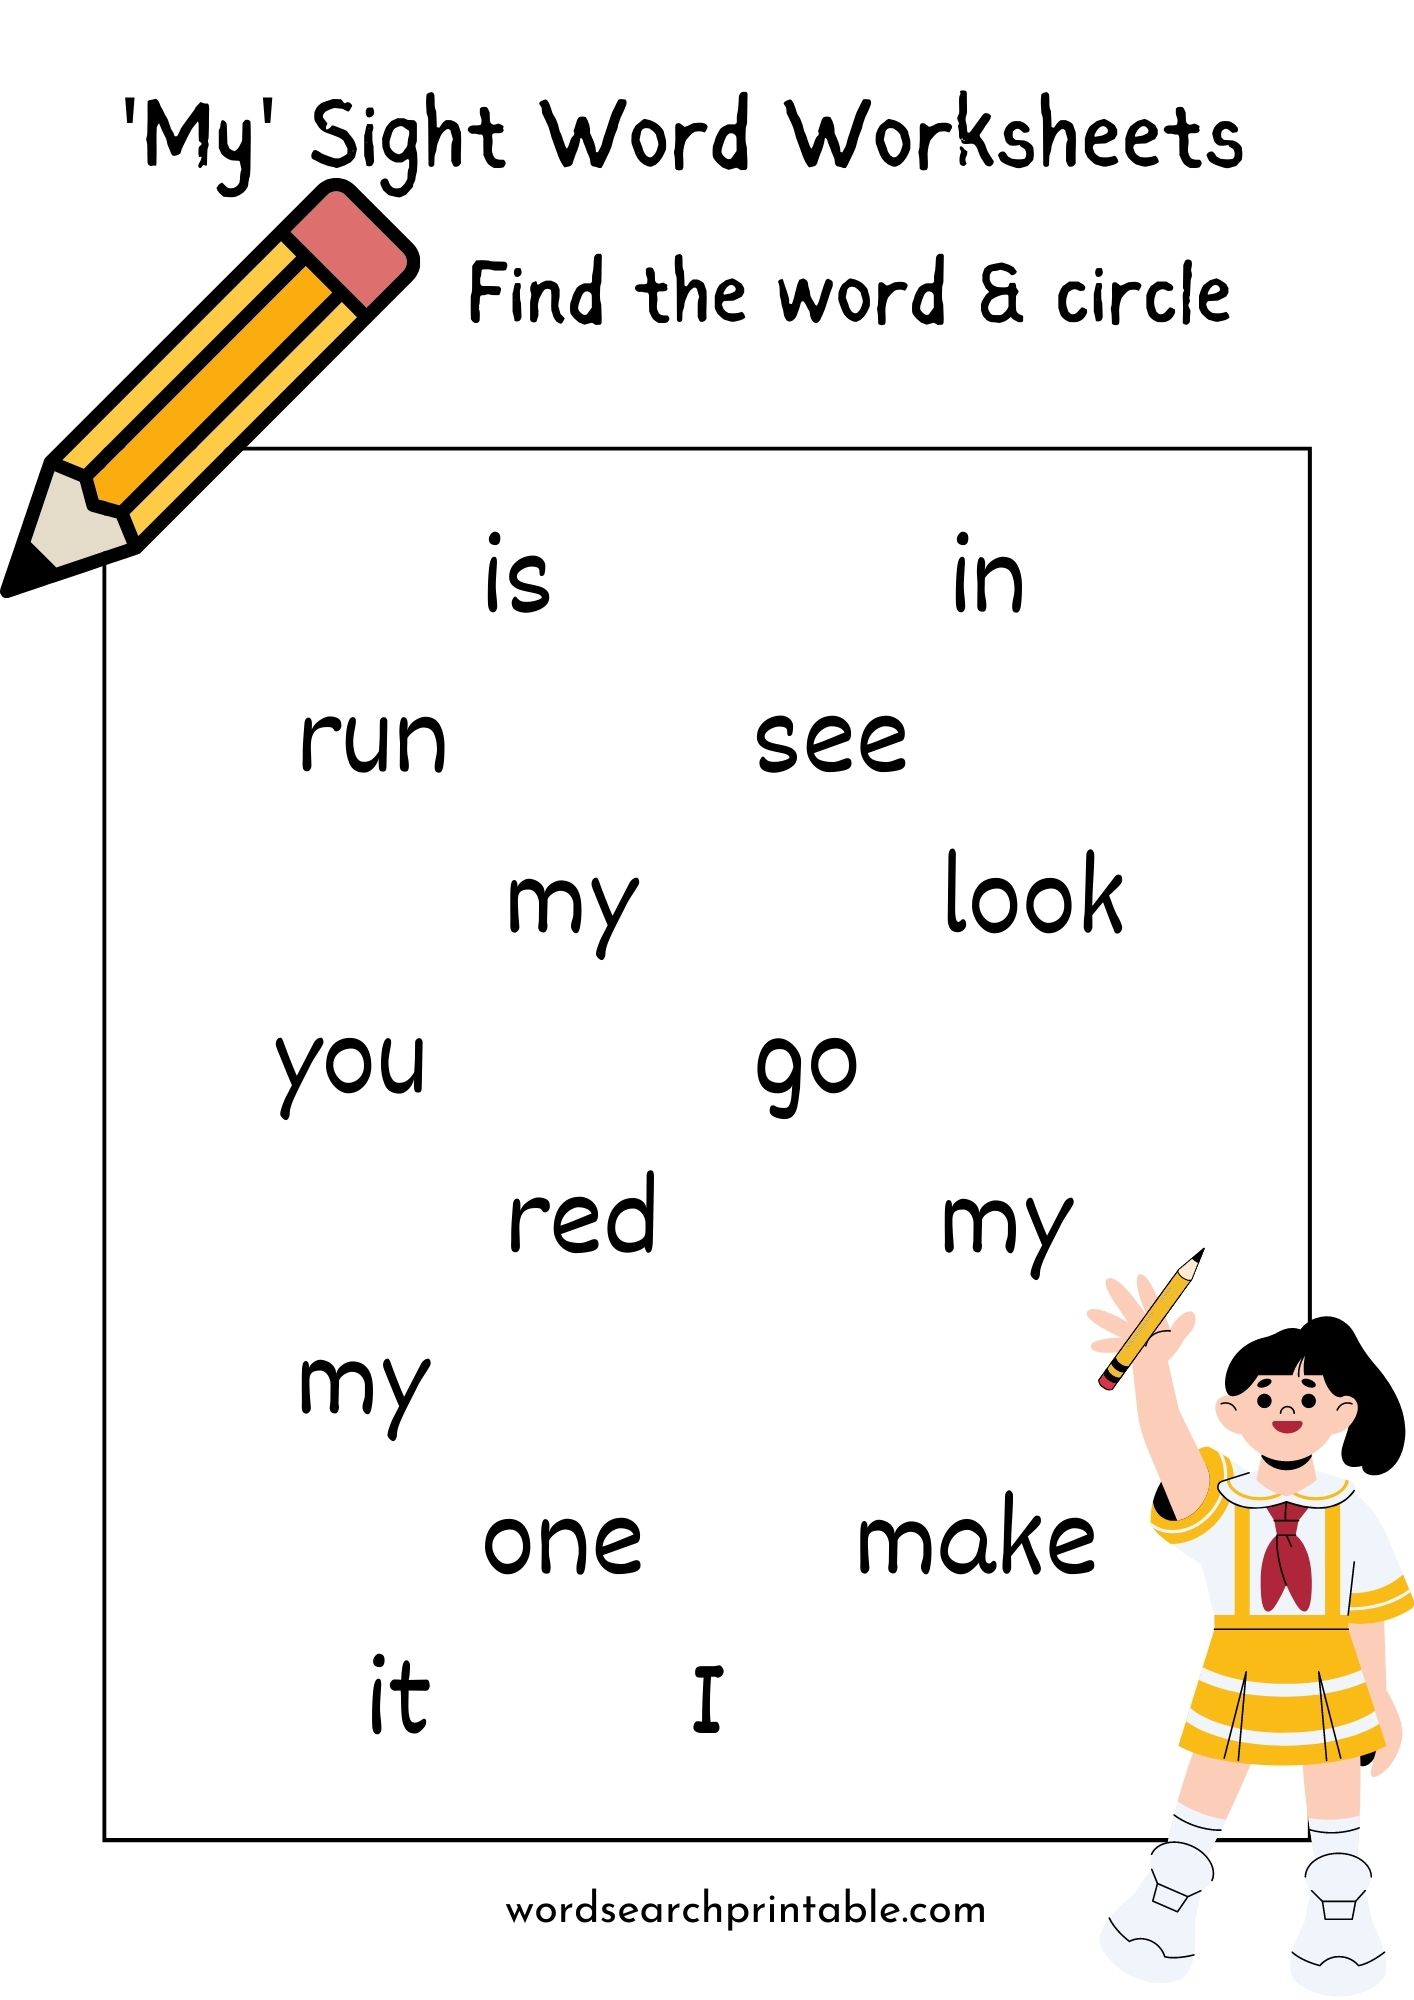 Find the sight word My and circle it